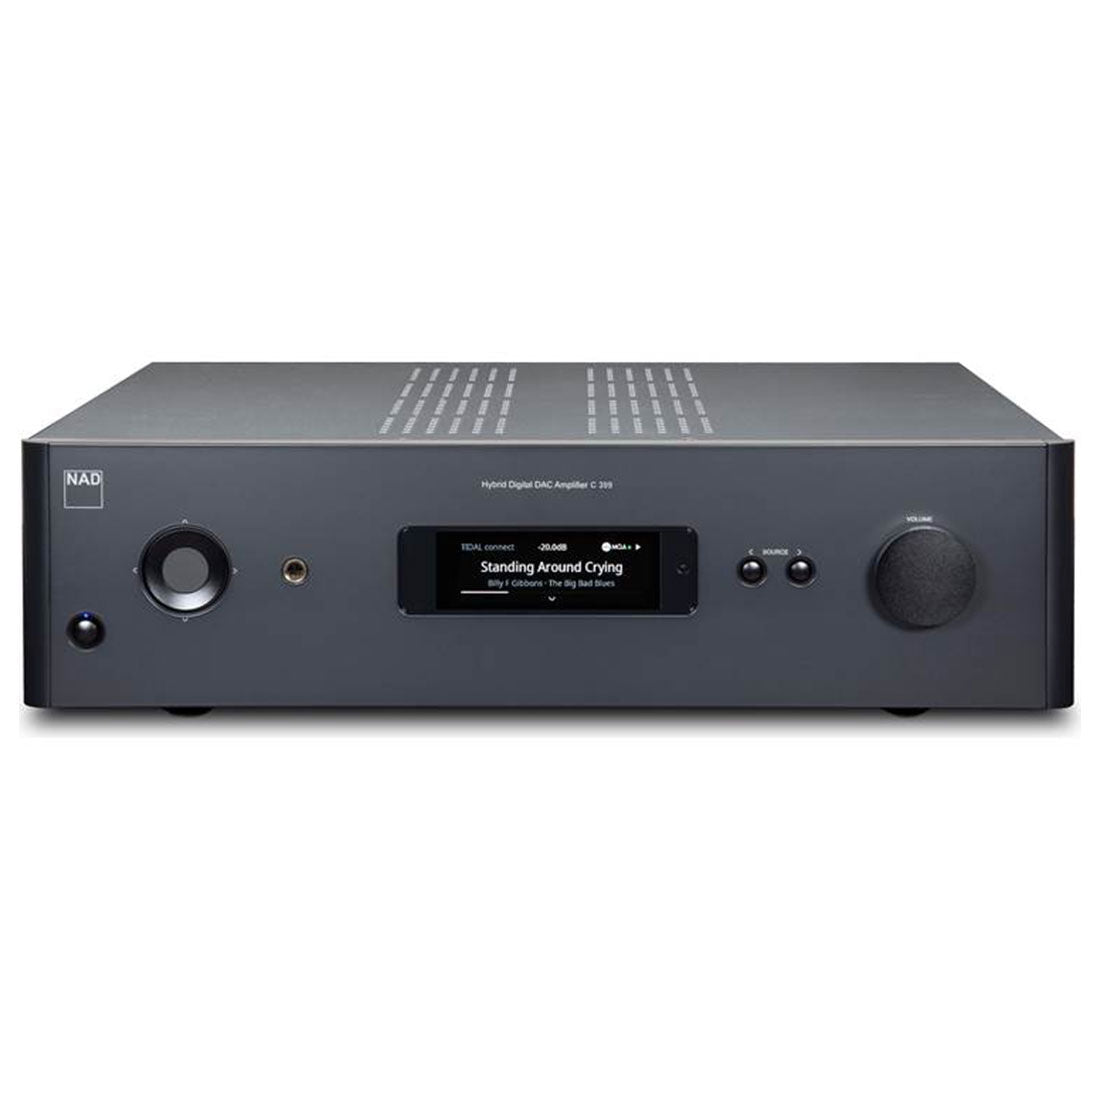 The C 399 HybridDigital DAC Amplifier takes NAD’s commitment to lasting value and sonic excellence to a whole new level. Best price on all NAD Electronics High Performance Hi-Fi and Home Theatre at Vinyl Sound, music and hi-fi apps including AV receivers, Music Streamers, Turntables, Amplifiers models C 399 - C 700 - M10 V2 - C 316BEE V2 - C 368 - D 3045.